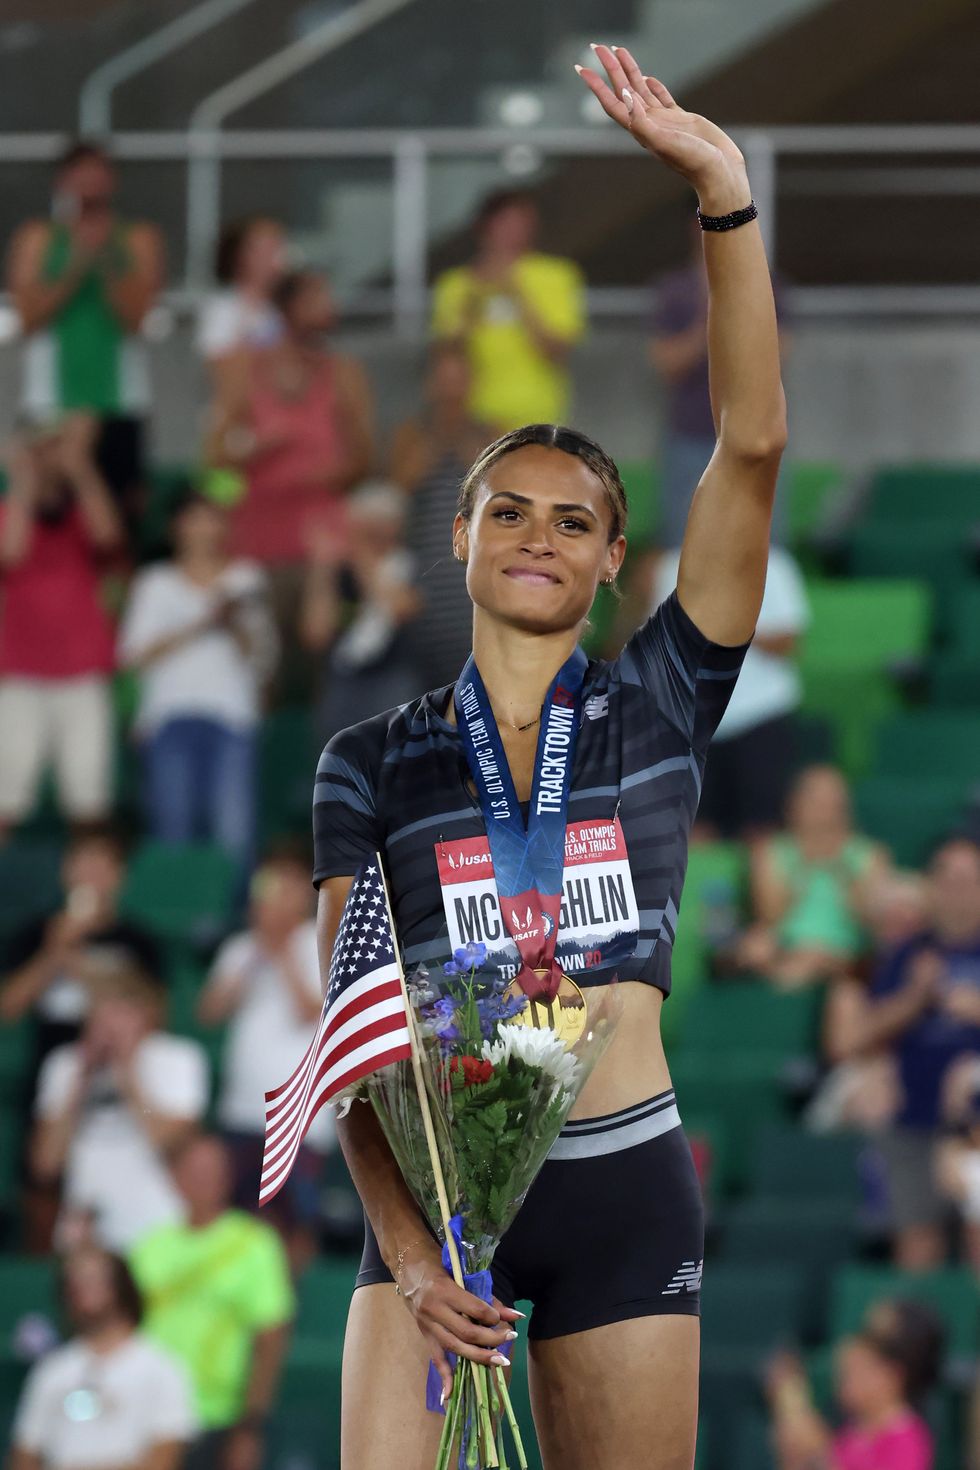 25 Hottest Female Track and Field Athletes  Track and field athlete,  Female athletes, Field athletes